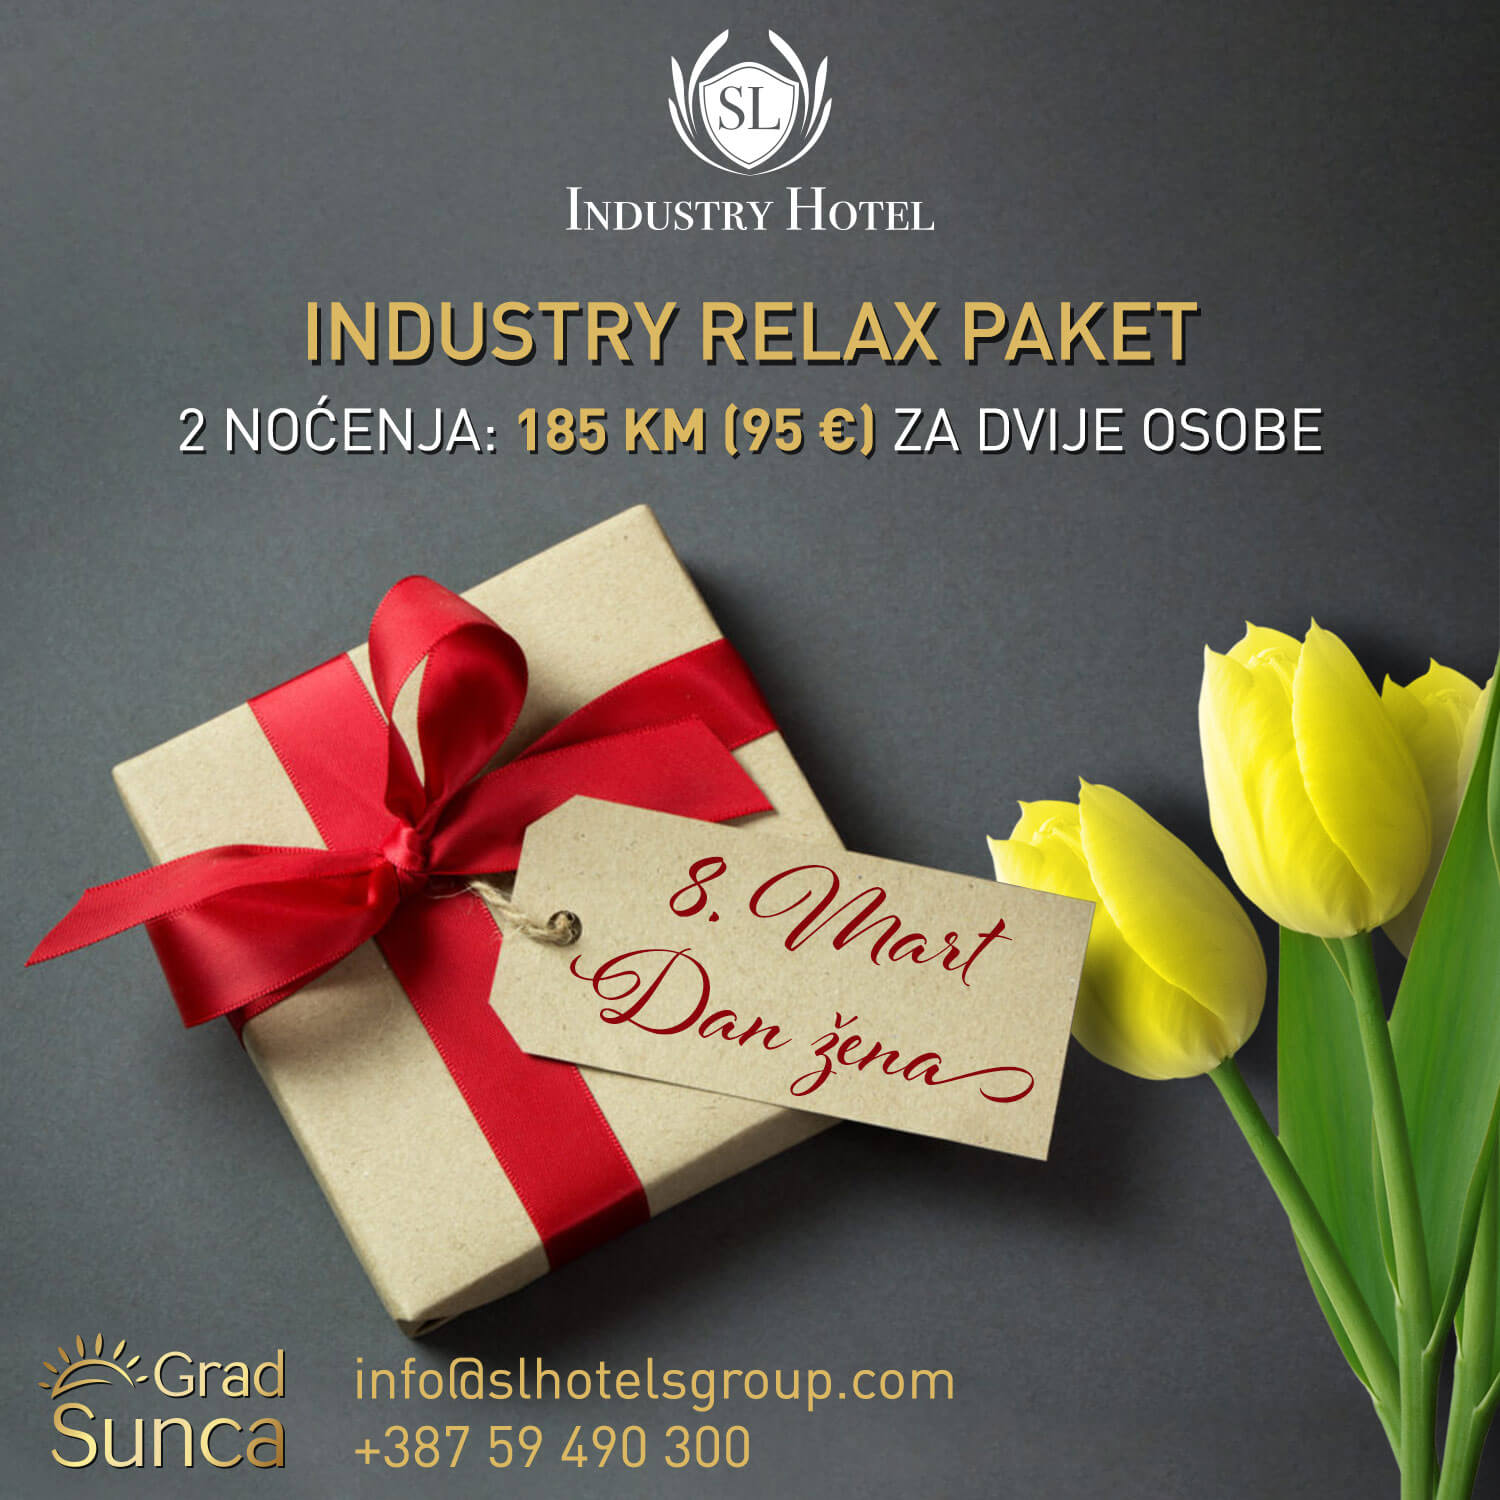 Industry relax paket